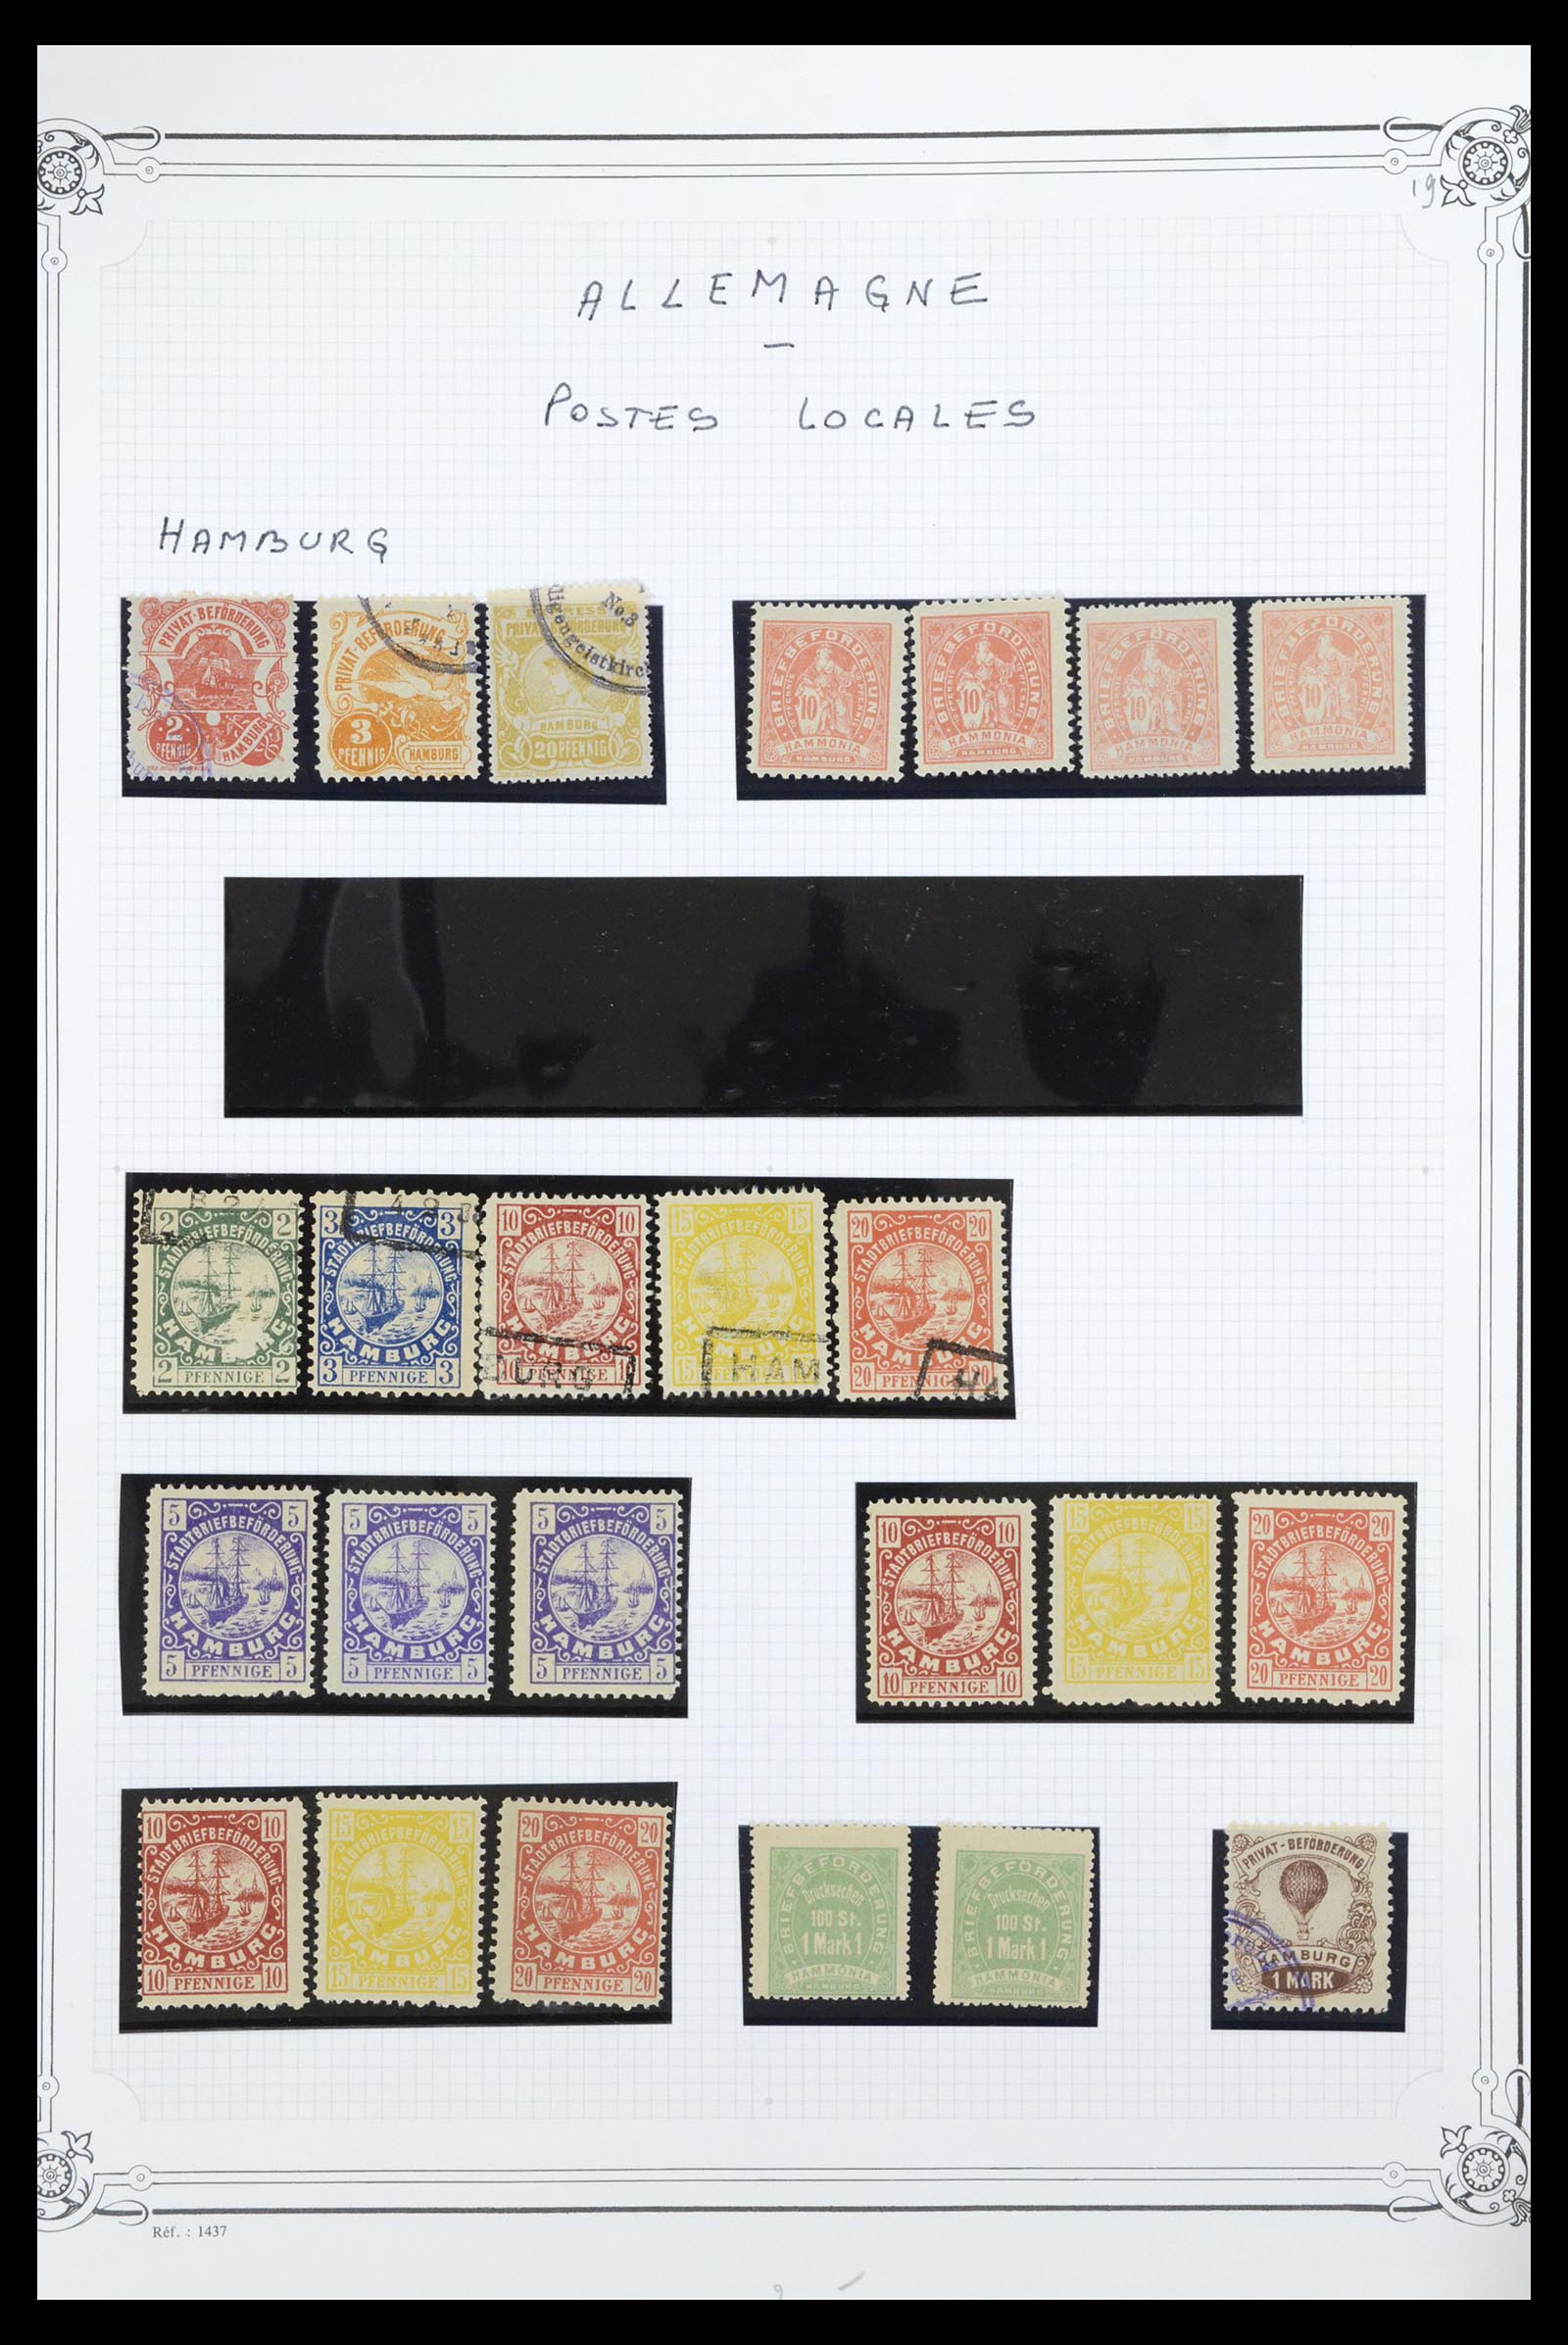 36972 018 - Stamp collection 36972 Germany local post 1880-1900.